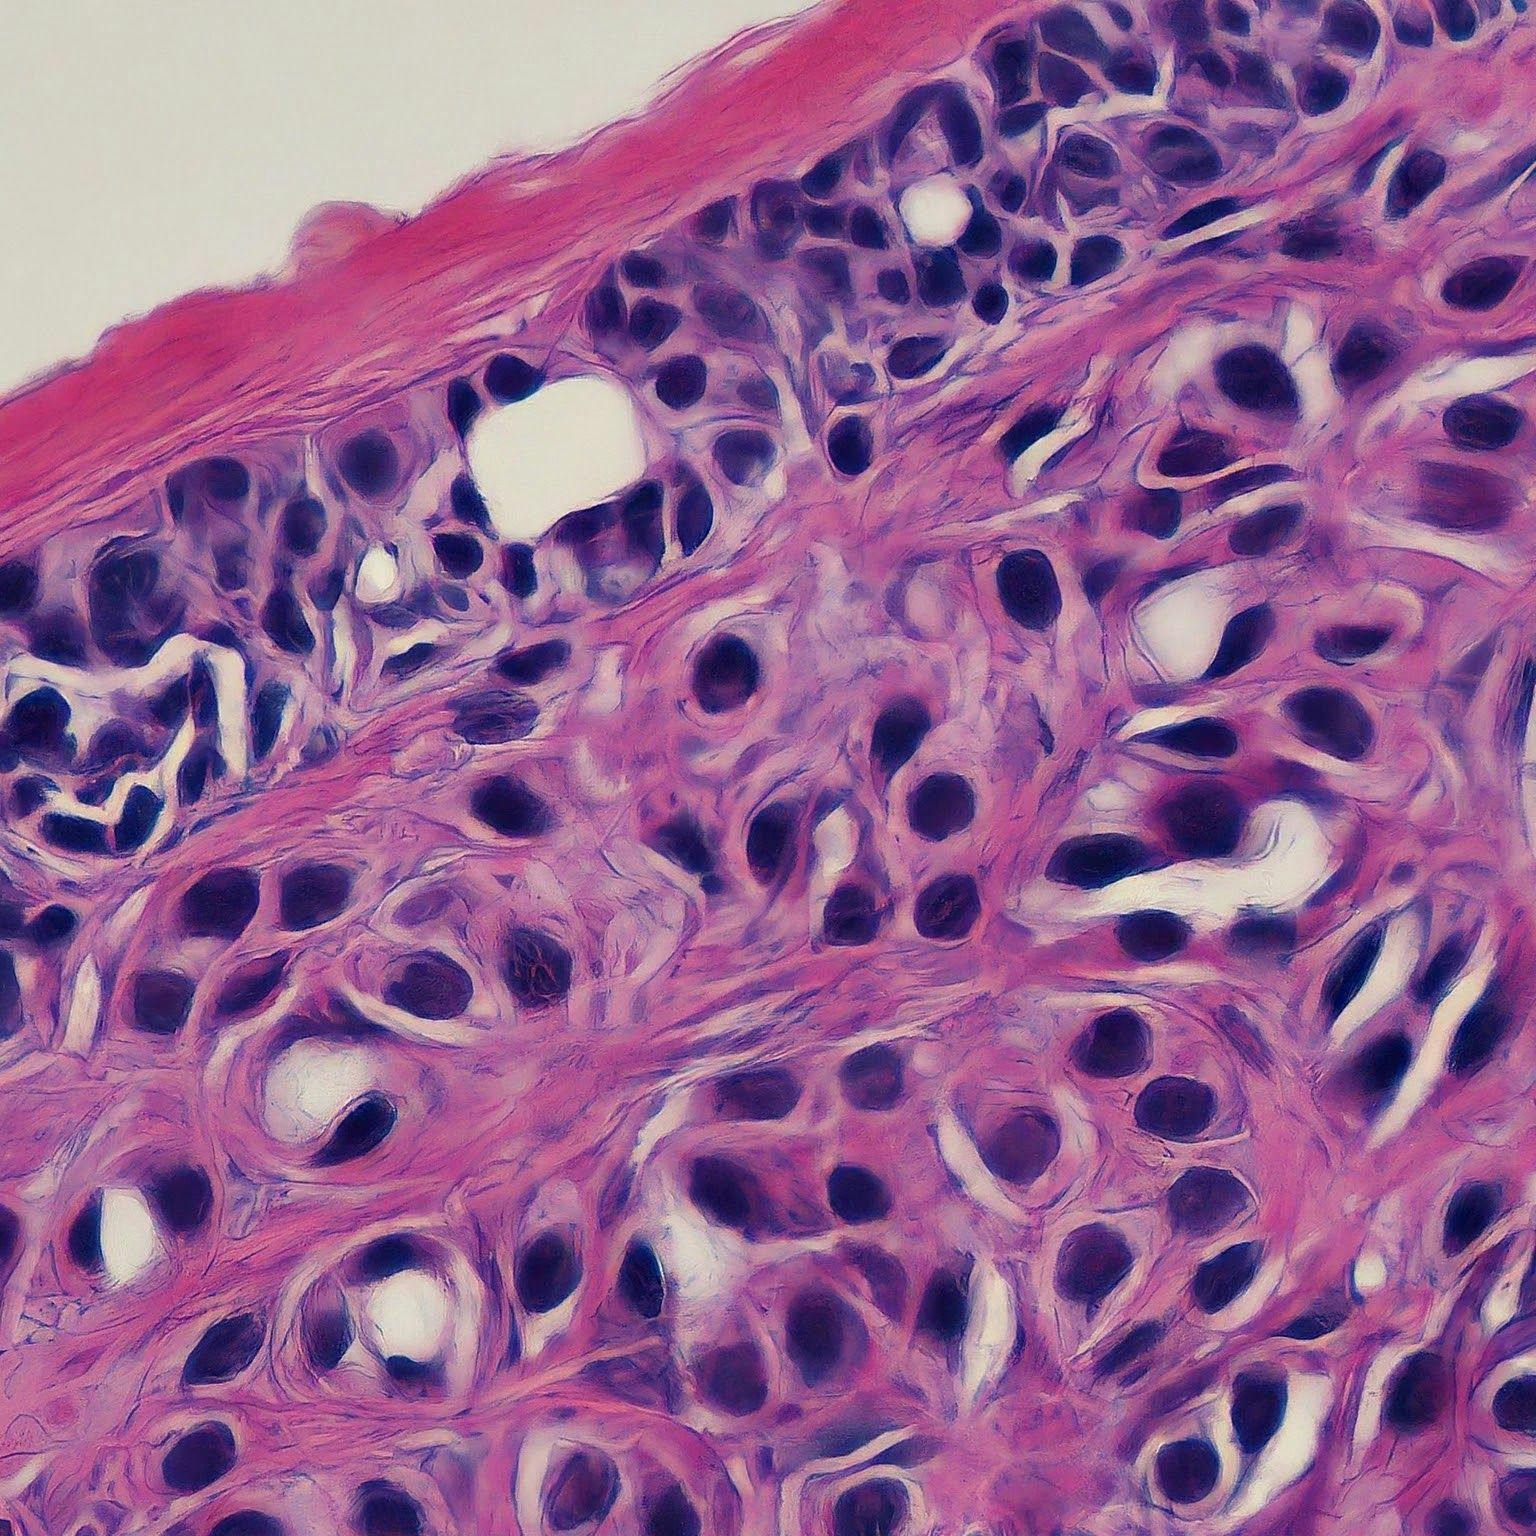 Cutaneous squamous cell carcinoma - Generated with Google Gemini AI